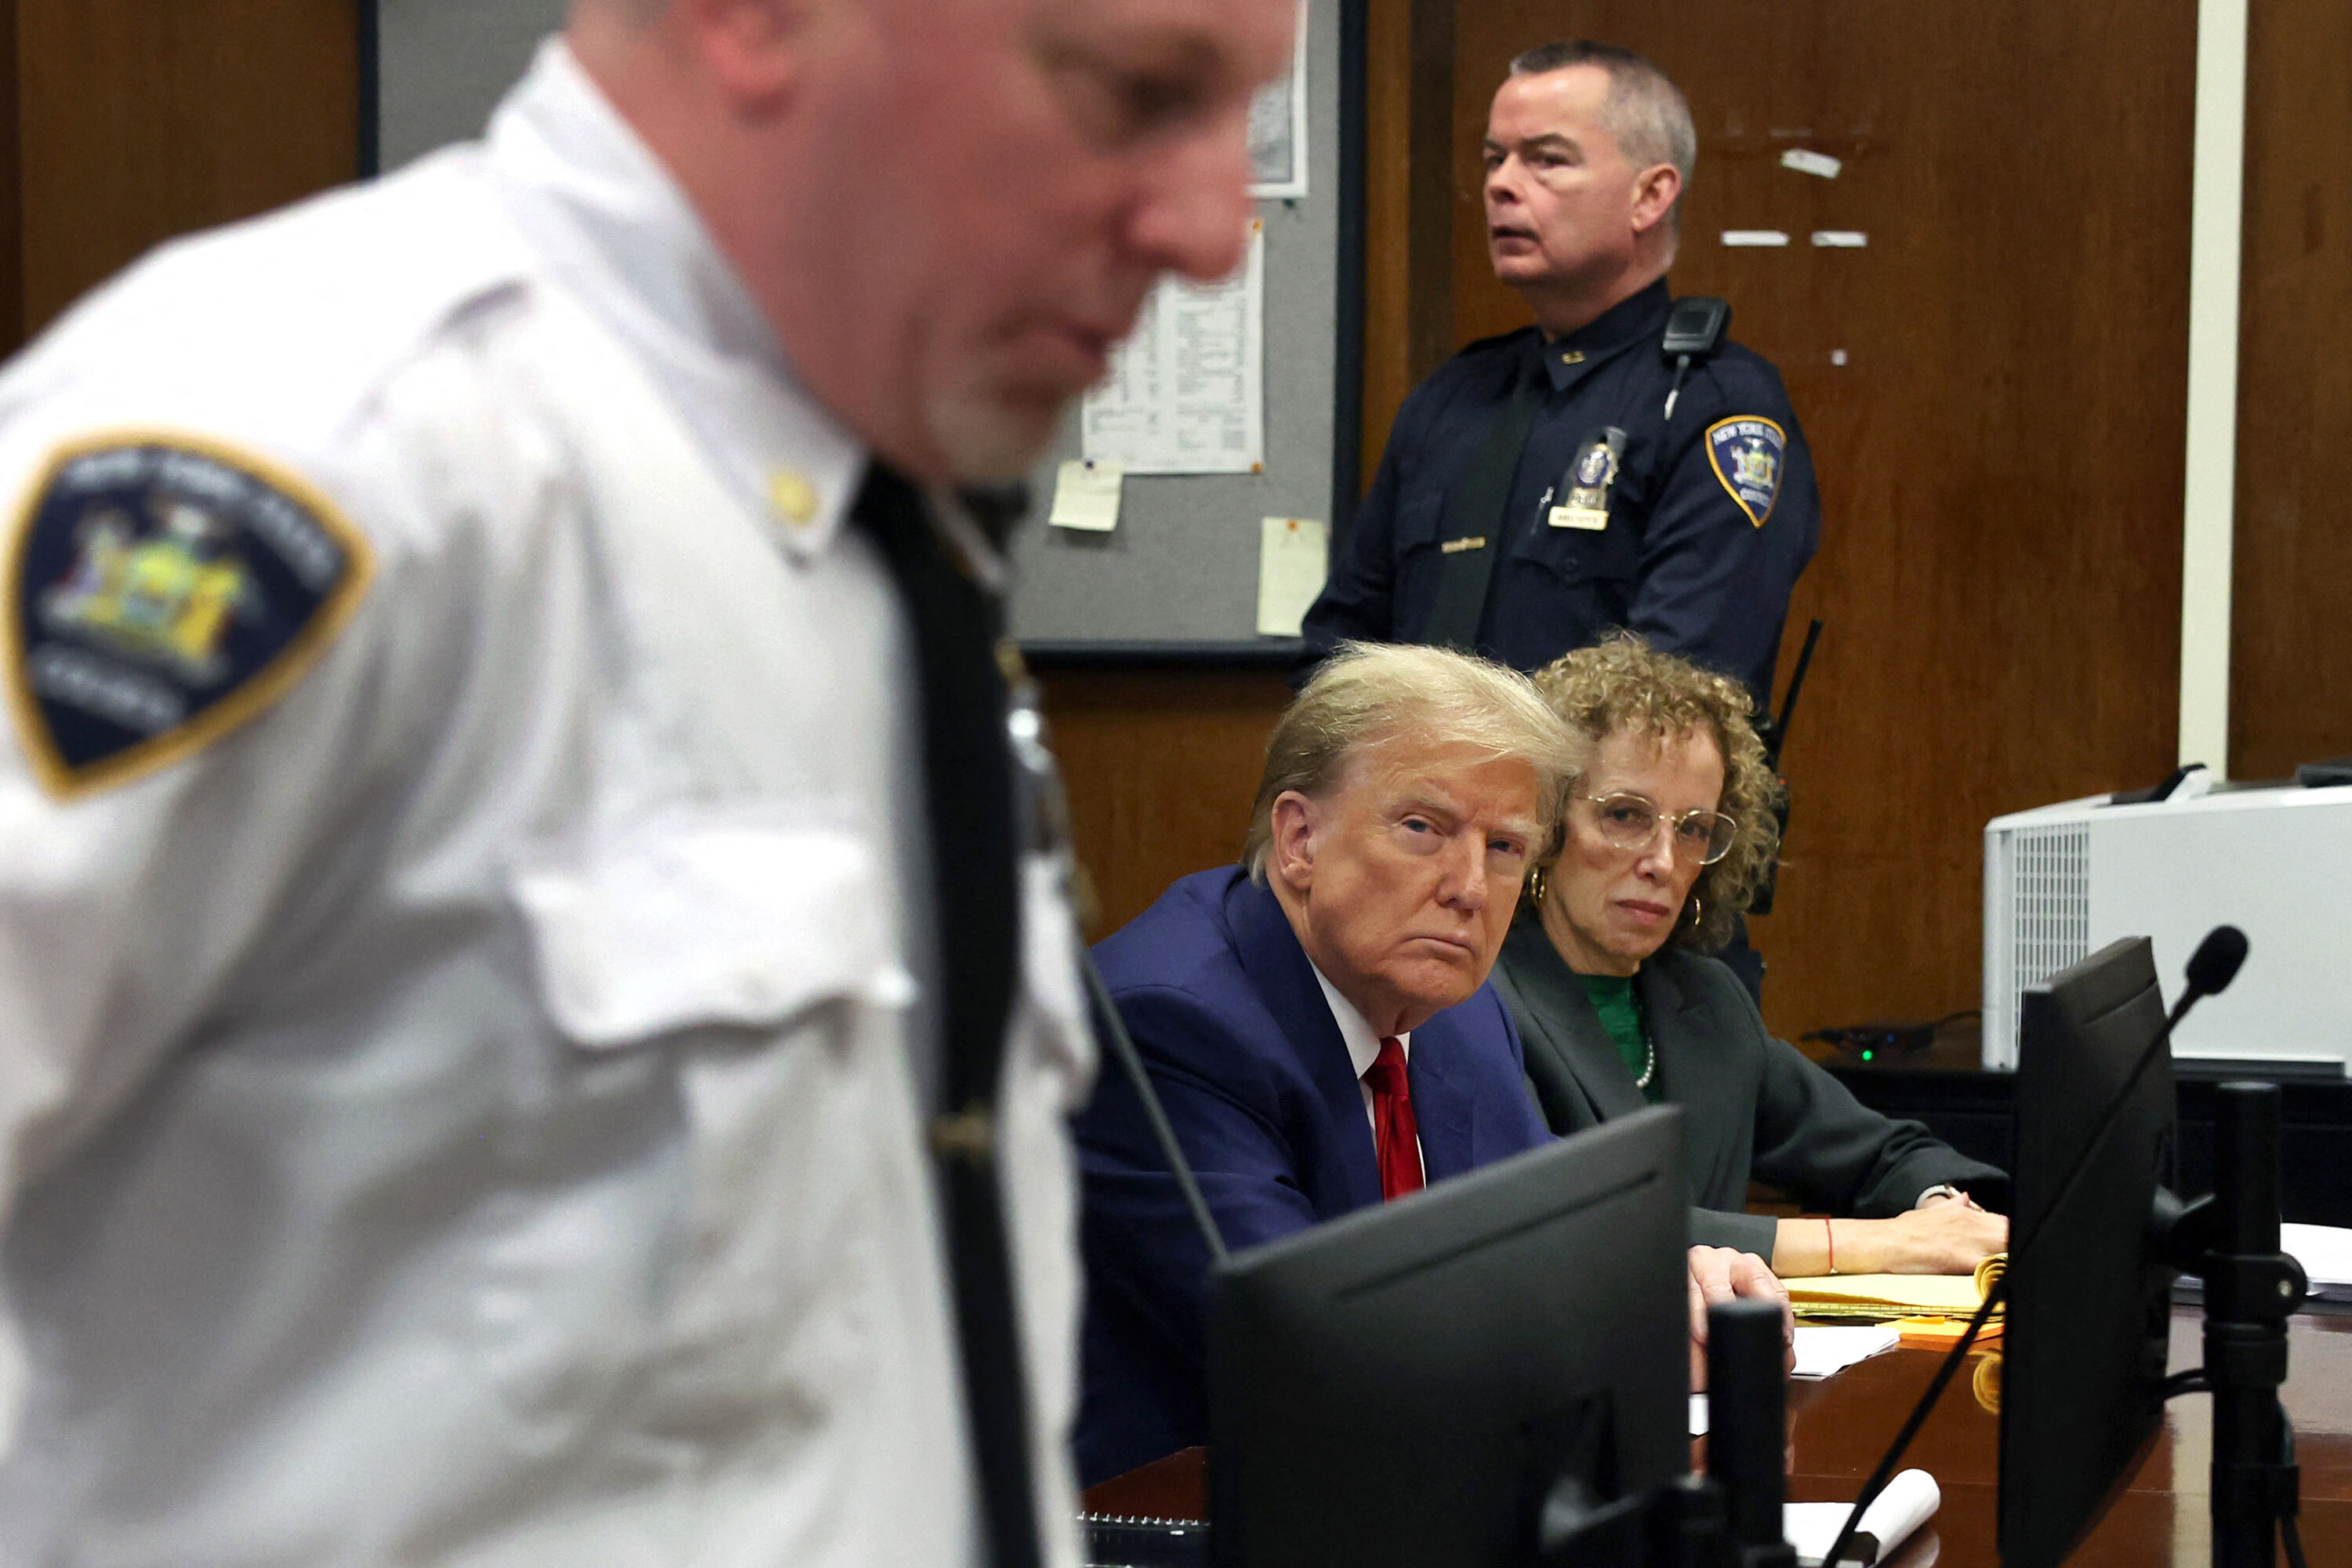 Former President Donald Trump and attorney Susan Necheles attend a hearing to determine the date of his trial for allegedly covering up hush money payments at Manhattan Criminal Court in New York on Monday.